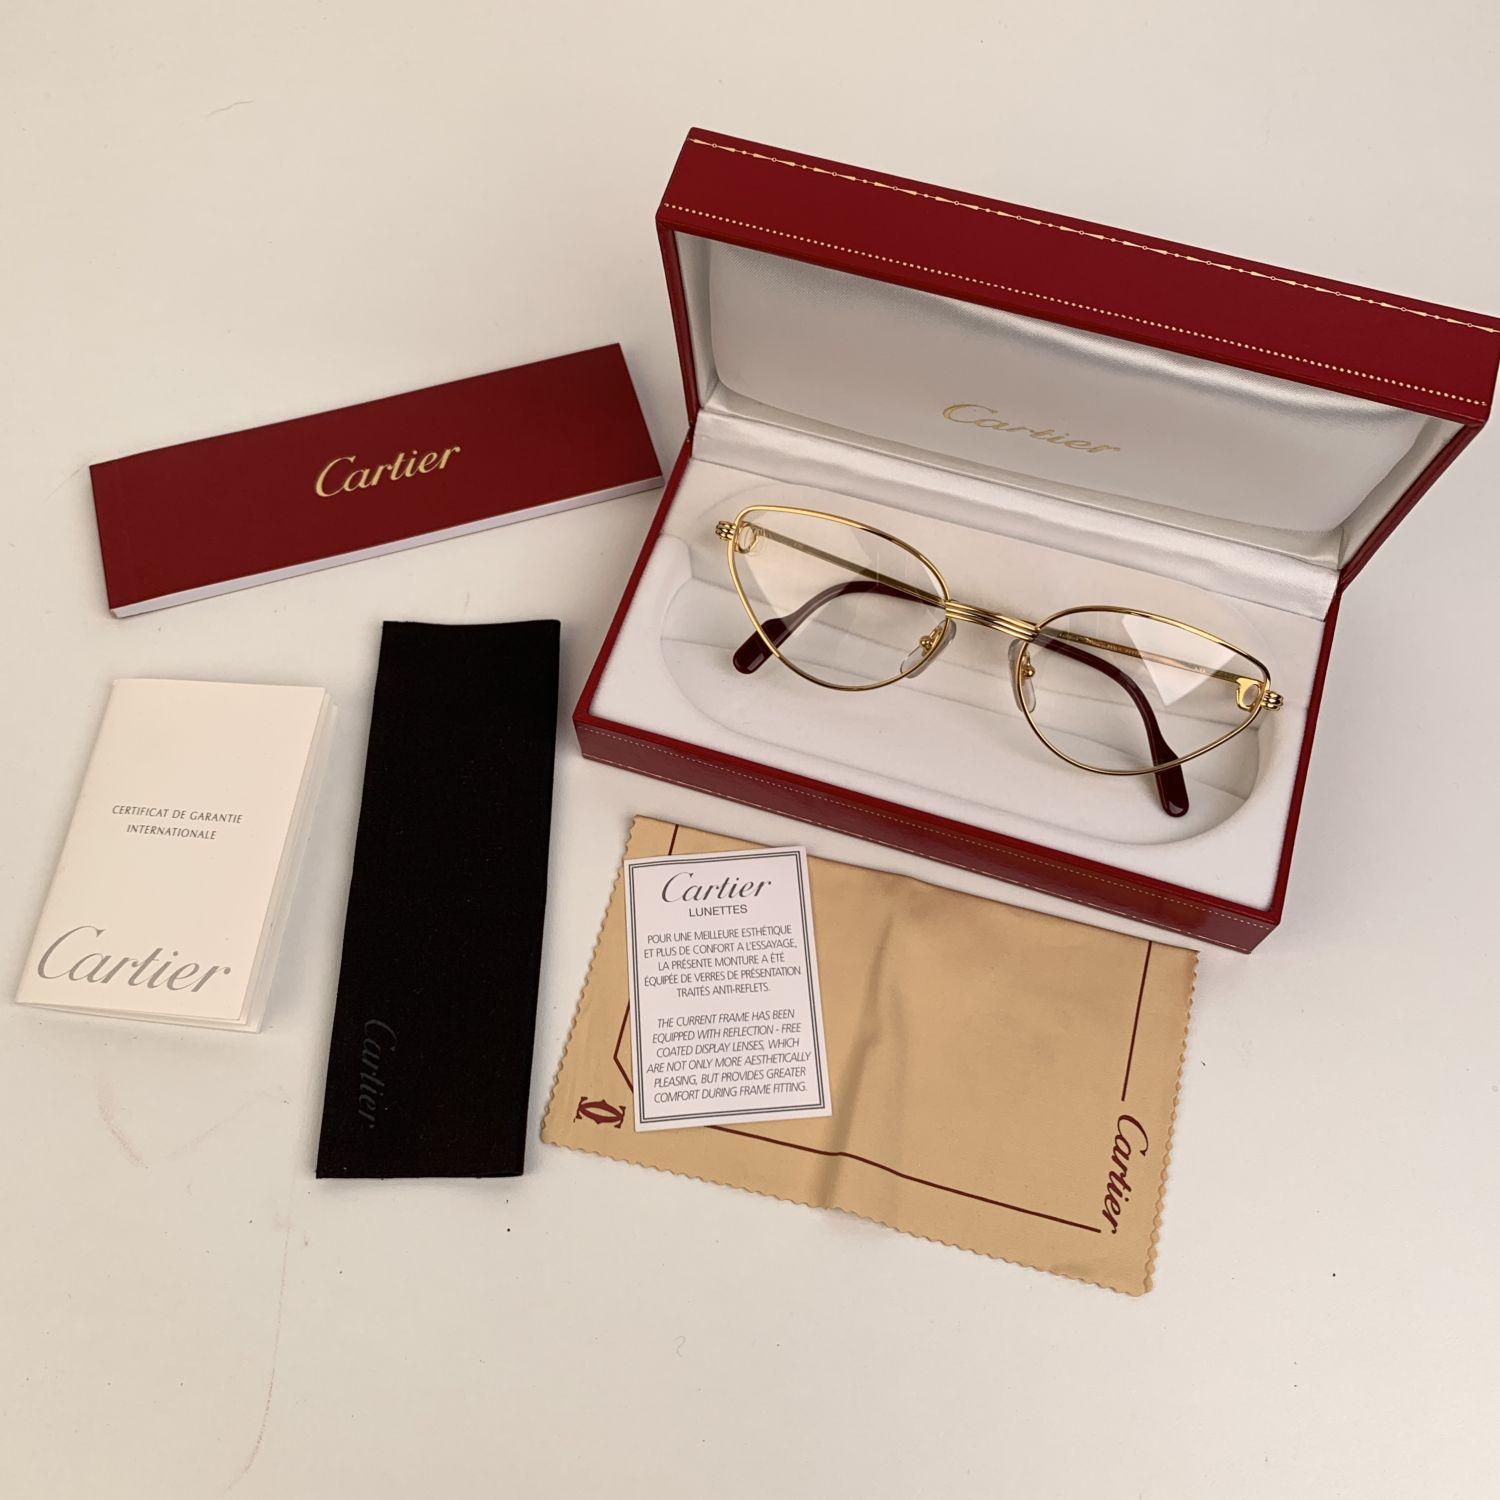 Original Vintage 1990s Cartier eyeglasses /frame from the 1990s. Beautiful gold cat-eye frame, with platinum finish on the sides.

Details

MATERIAL: Metal

COLOR: Gold

MODEL: Rivoli

GENDER: Women

COUNTRY OF MANUFACTURE: France

TYPE: